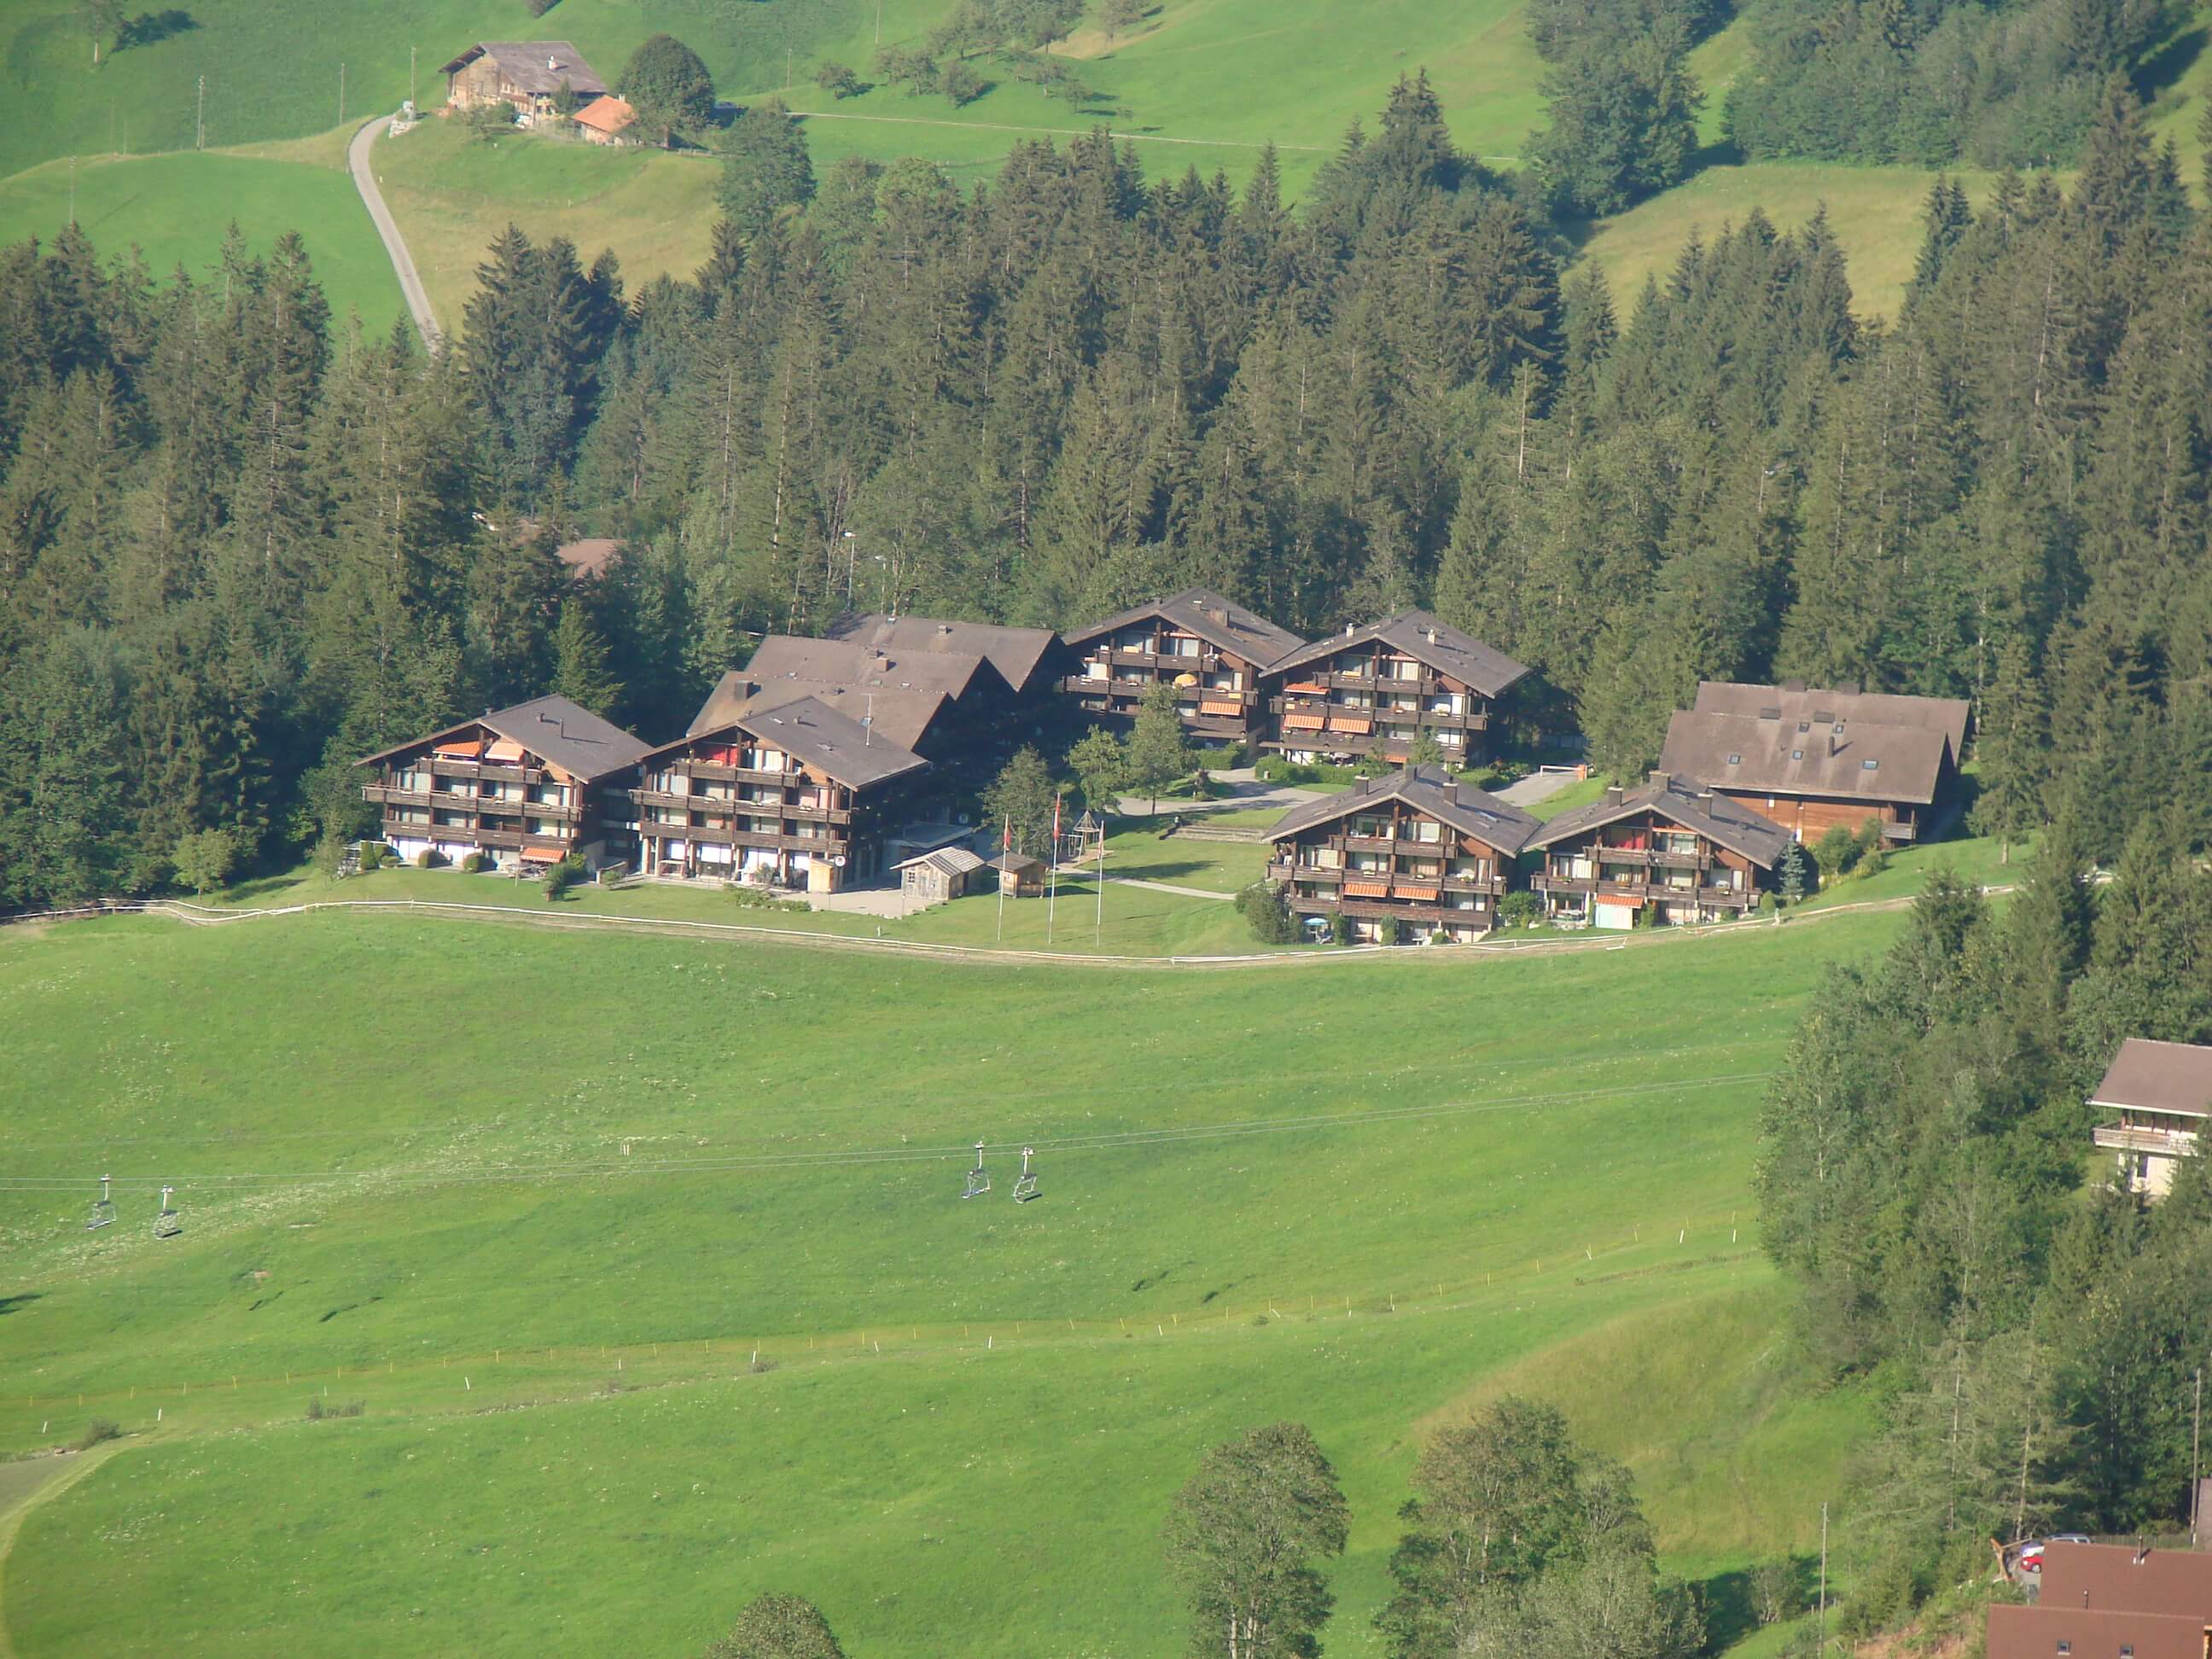 Wiriehorn Holiday Centre